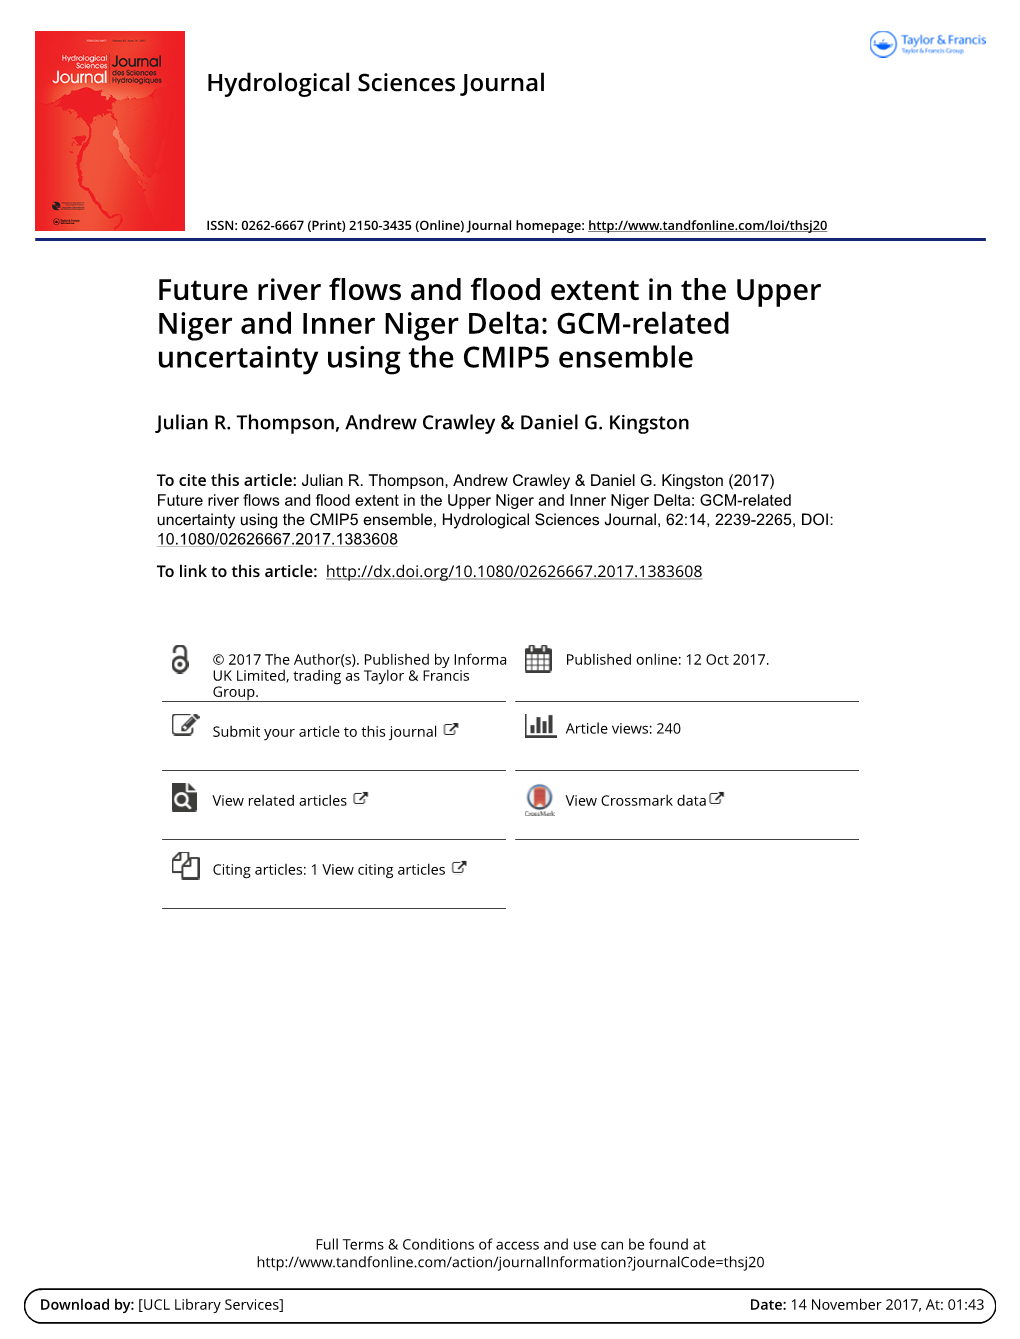 Future River Flows and Flood Extent in the Upper Niger and Inner Niger Delta: GCM-Related Uncertainty Using the CMIP5 Ensemble